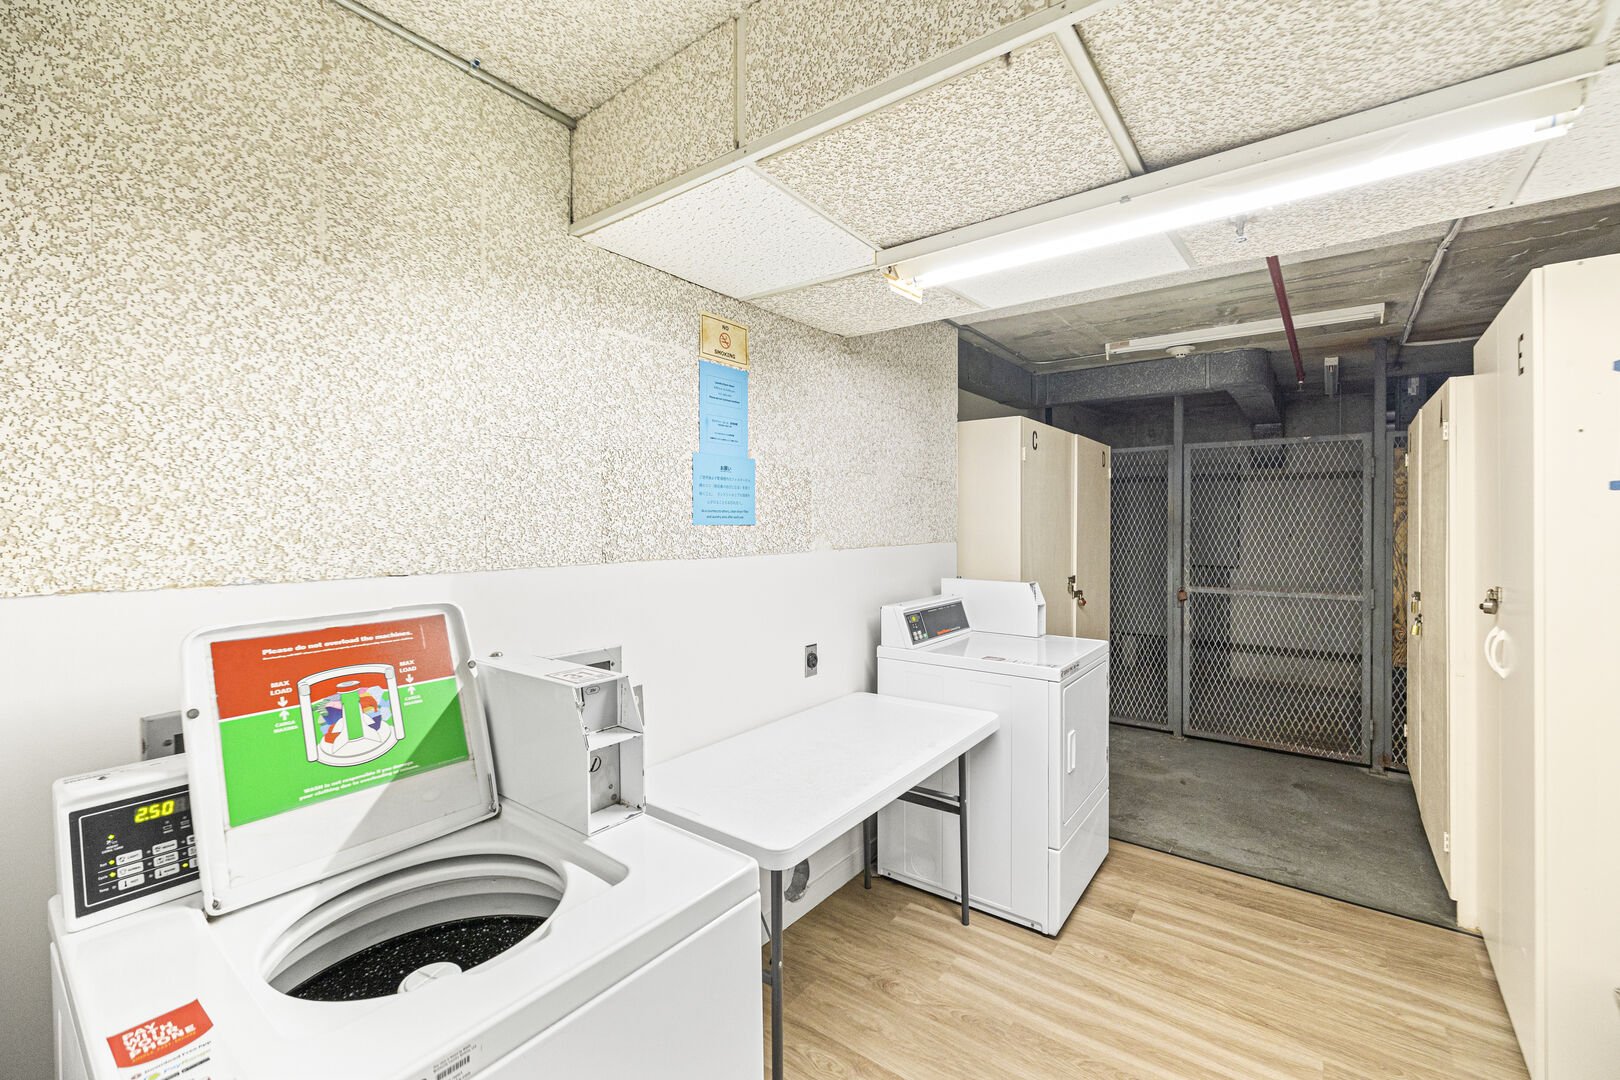 There is a laundry room on each floor with coin and credit-card-operated washers and dryers!